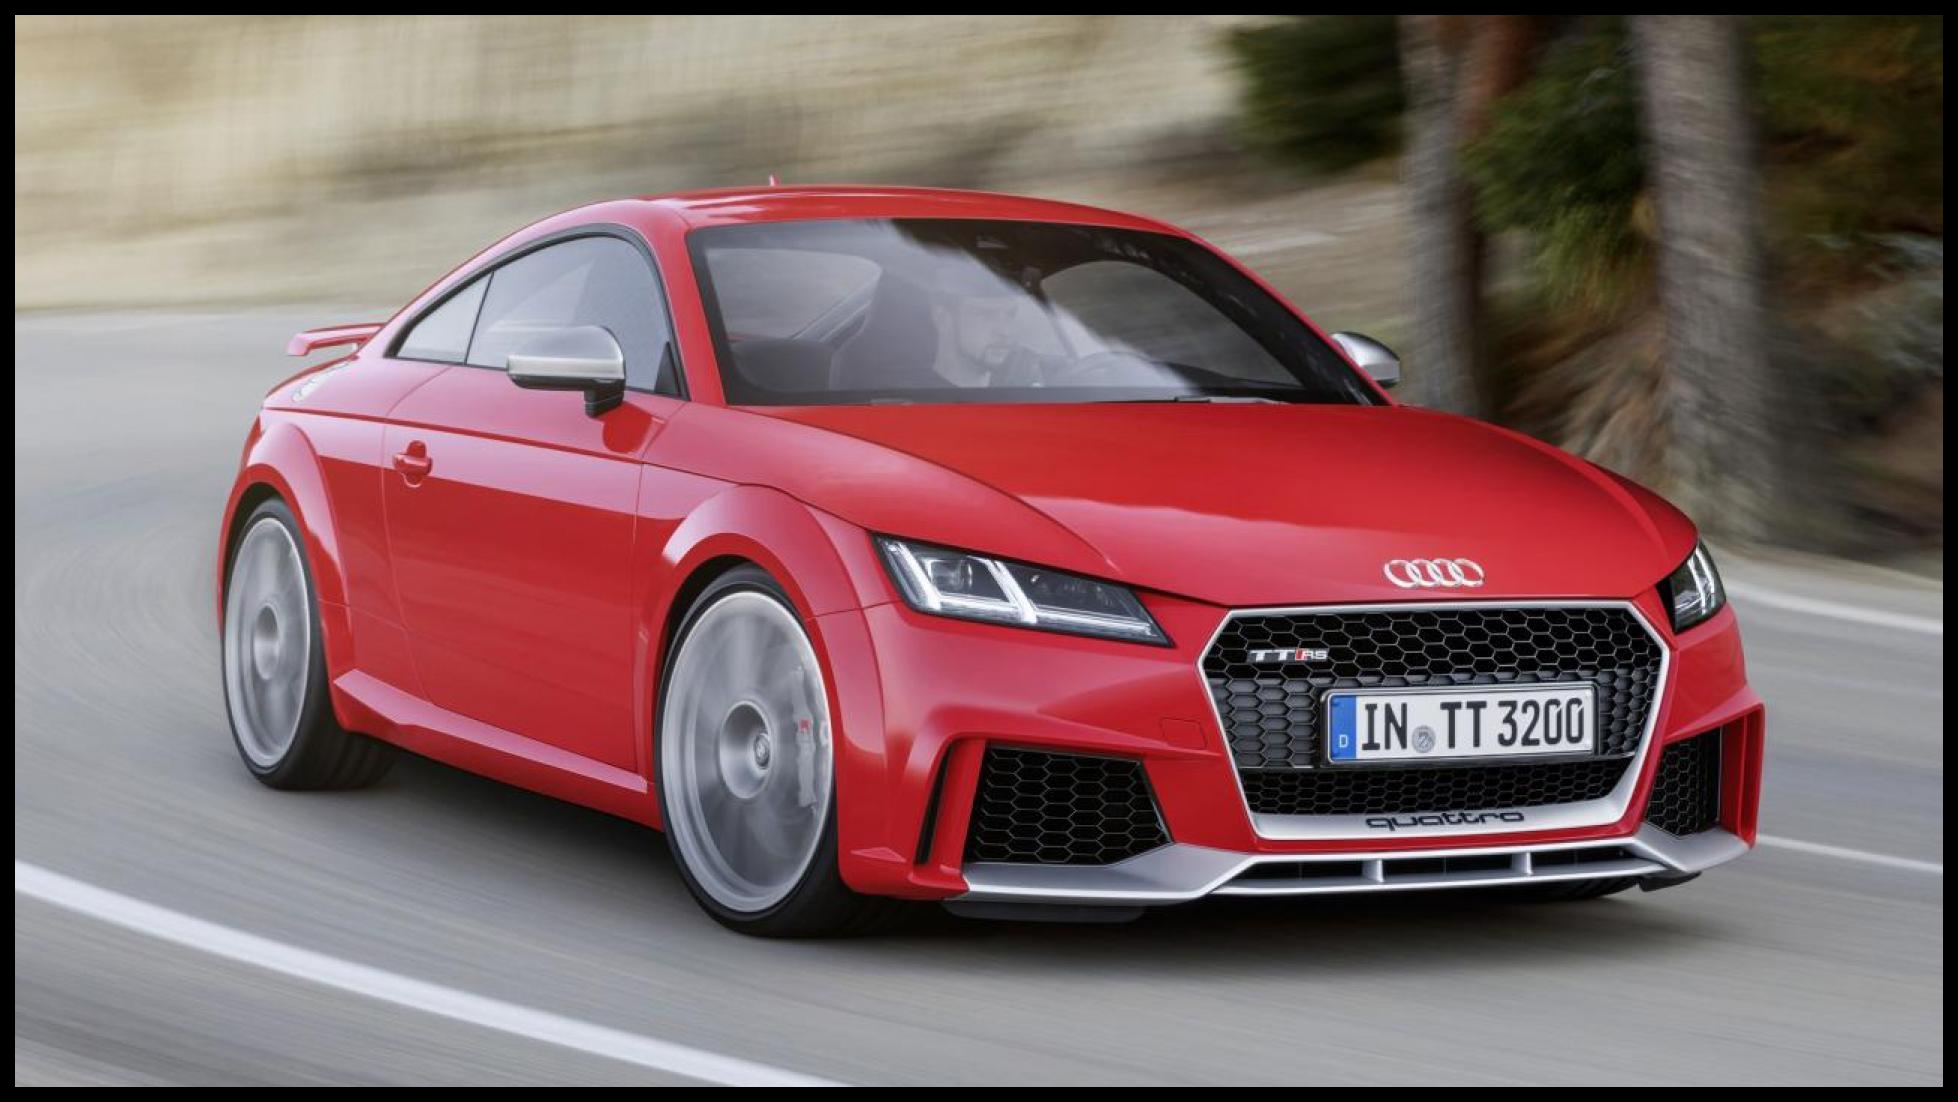 Image of Audi TT RS Coupe